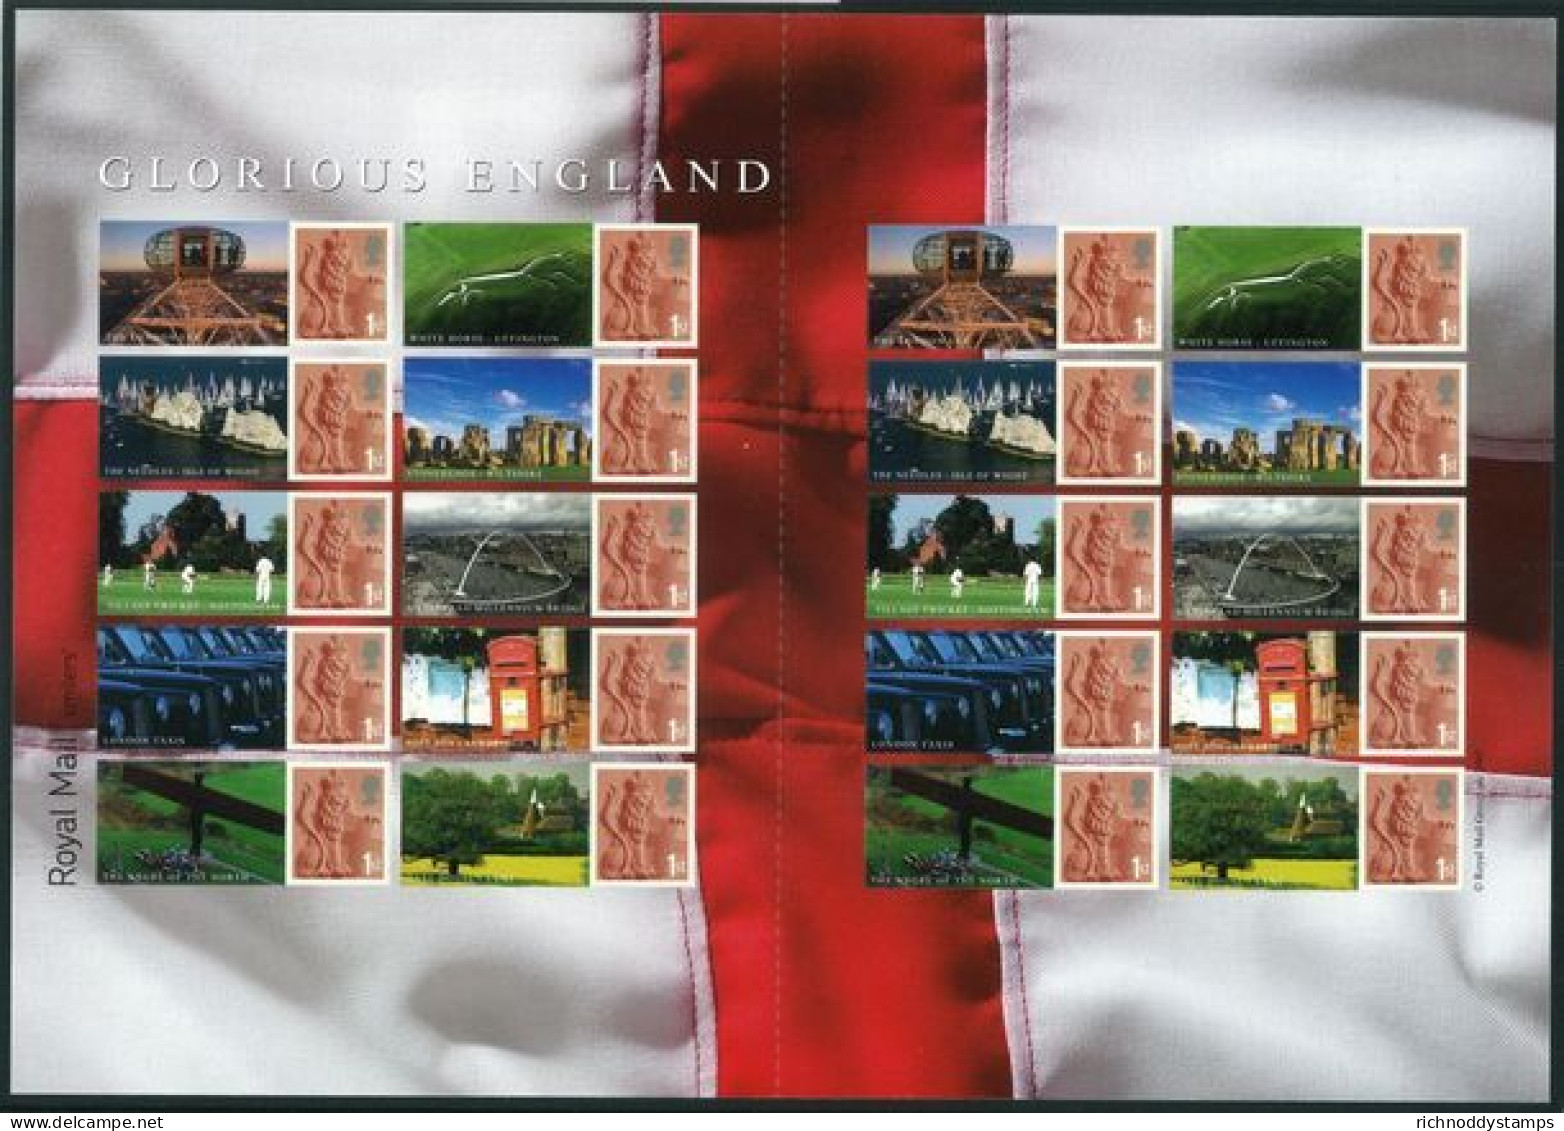 2007 Glorious England Smilers Sheet Unmounted Mint.  - Timbres Personnalisés